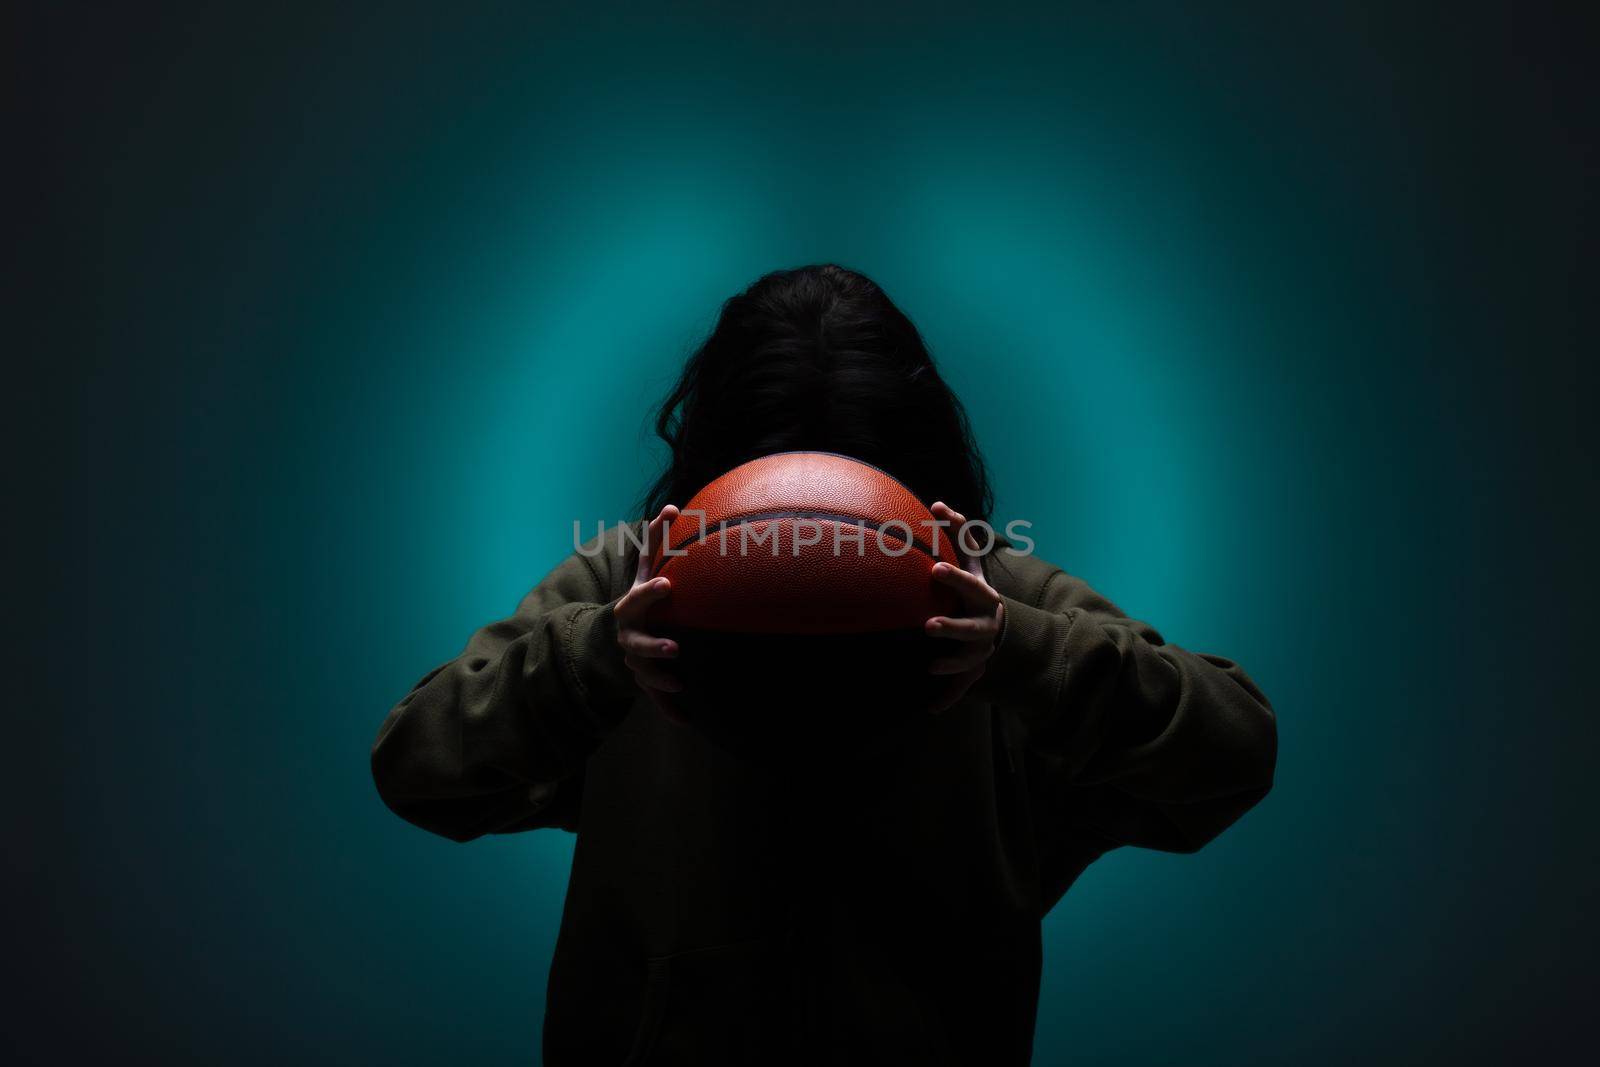 Teenage girl with basketball. Silhouette studio portrait with neon blue colored background.